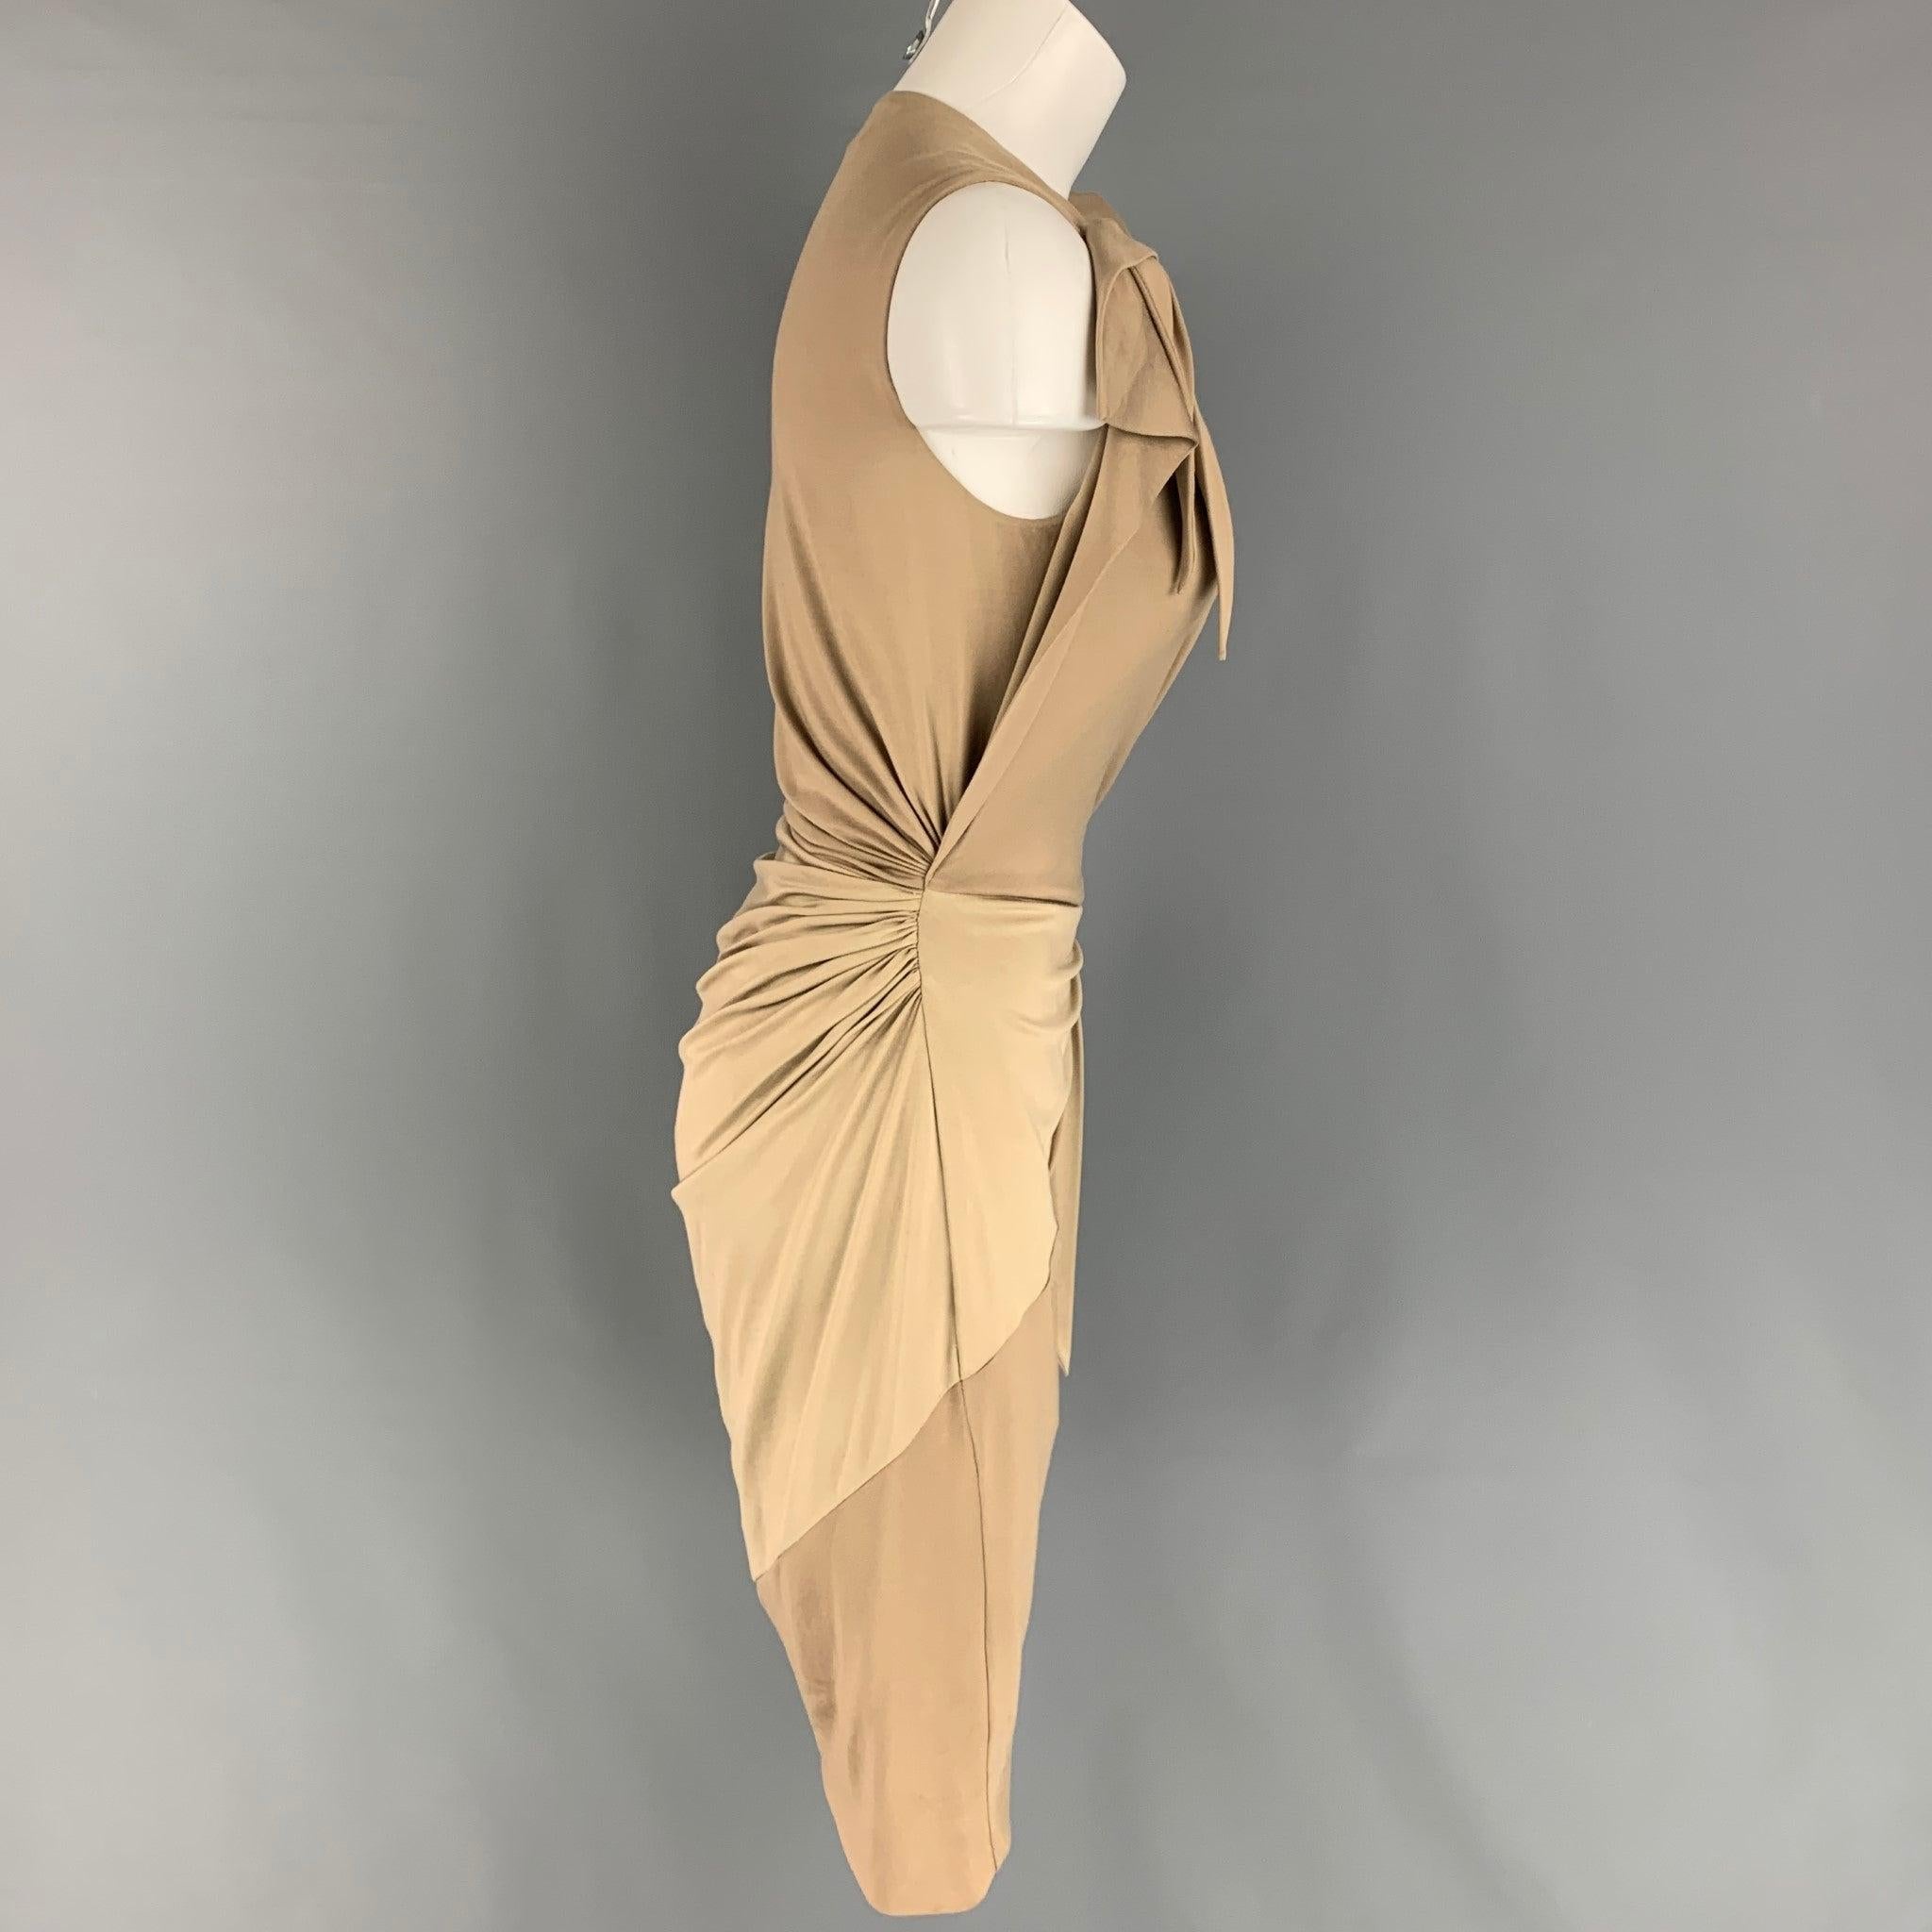 BURBERRY dress comes in a khaki stretch silk featuring a sheath style, gathered knot details, snap buttons, and a side zipper closure. Made in Italy.
Very Good
Pre-Owned Condition. 

Marked:   UK 8 / US 6 / IT 40 

Measurements: 
 
Shoulder: 13